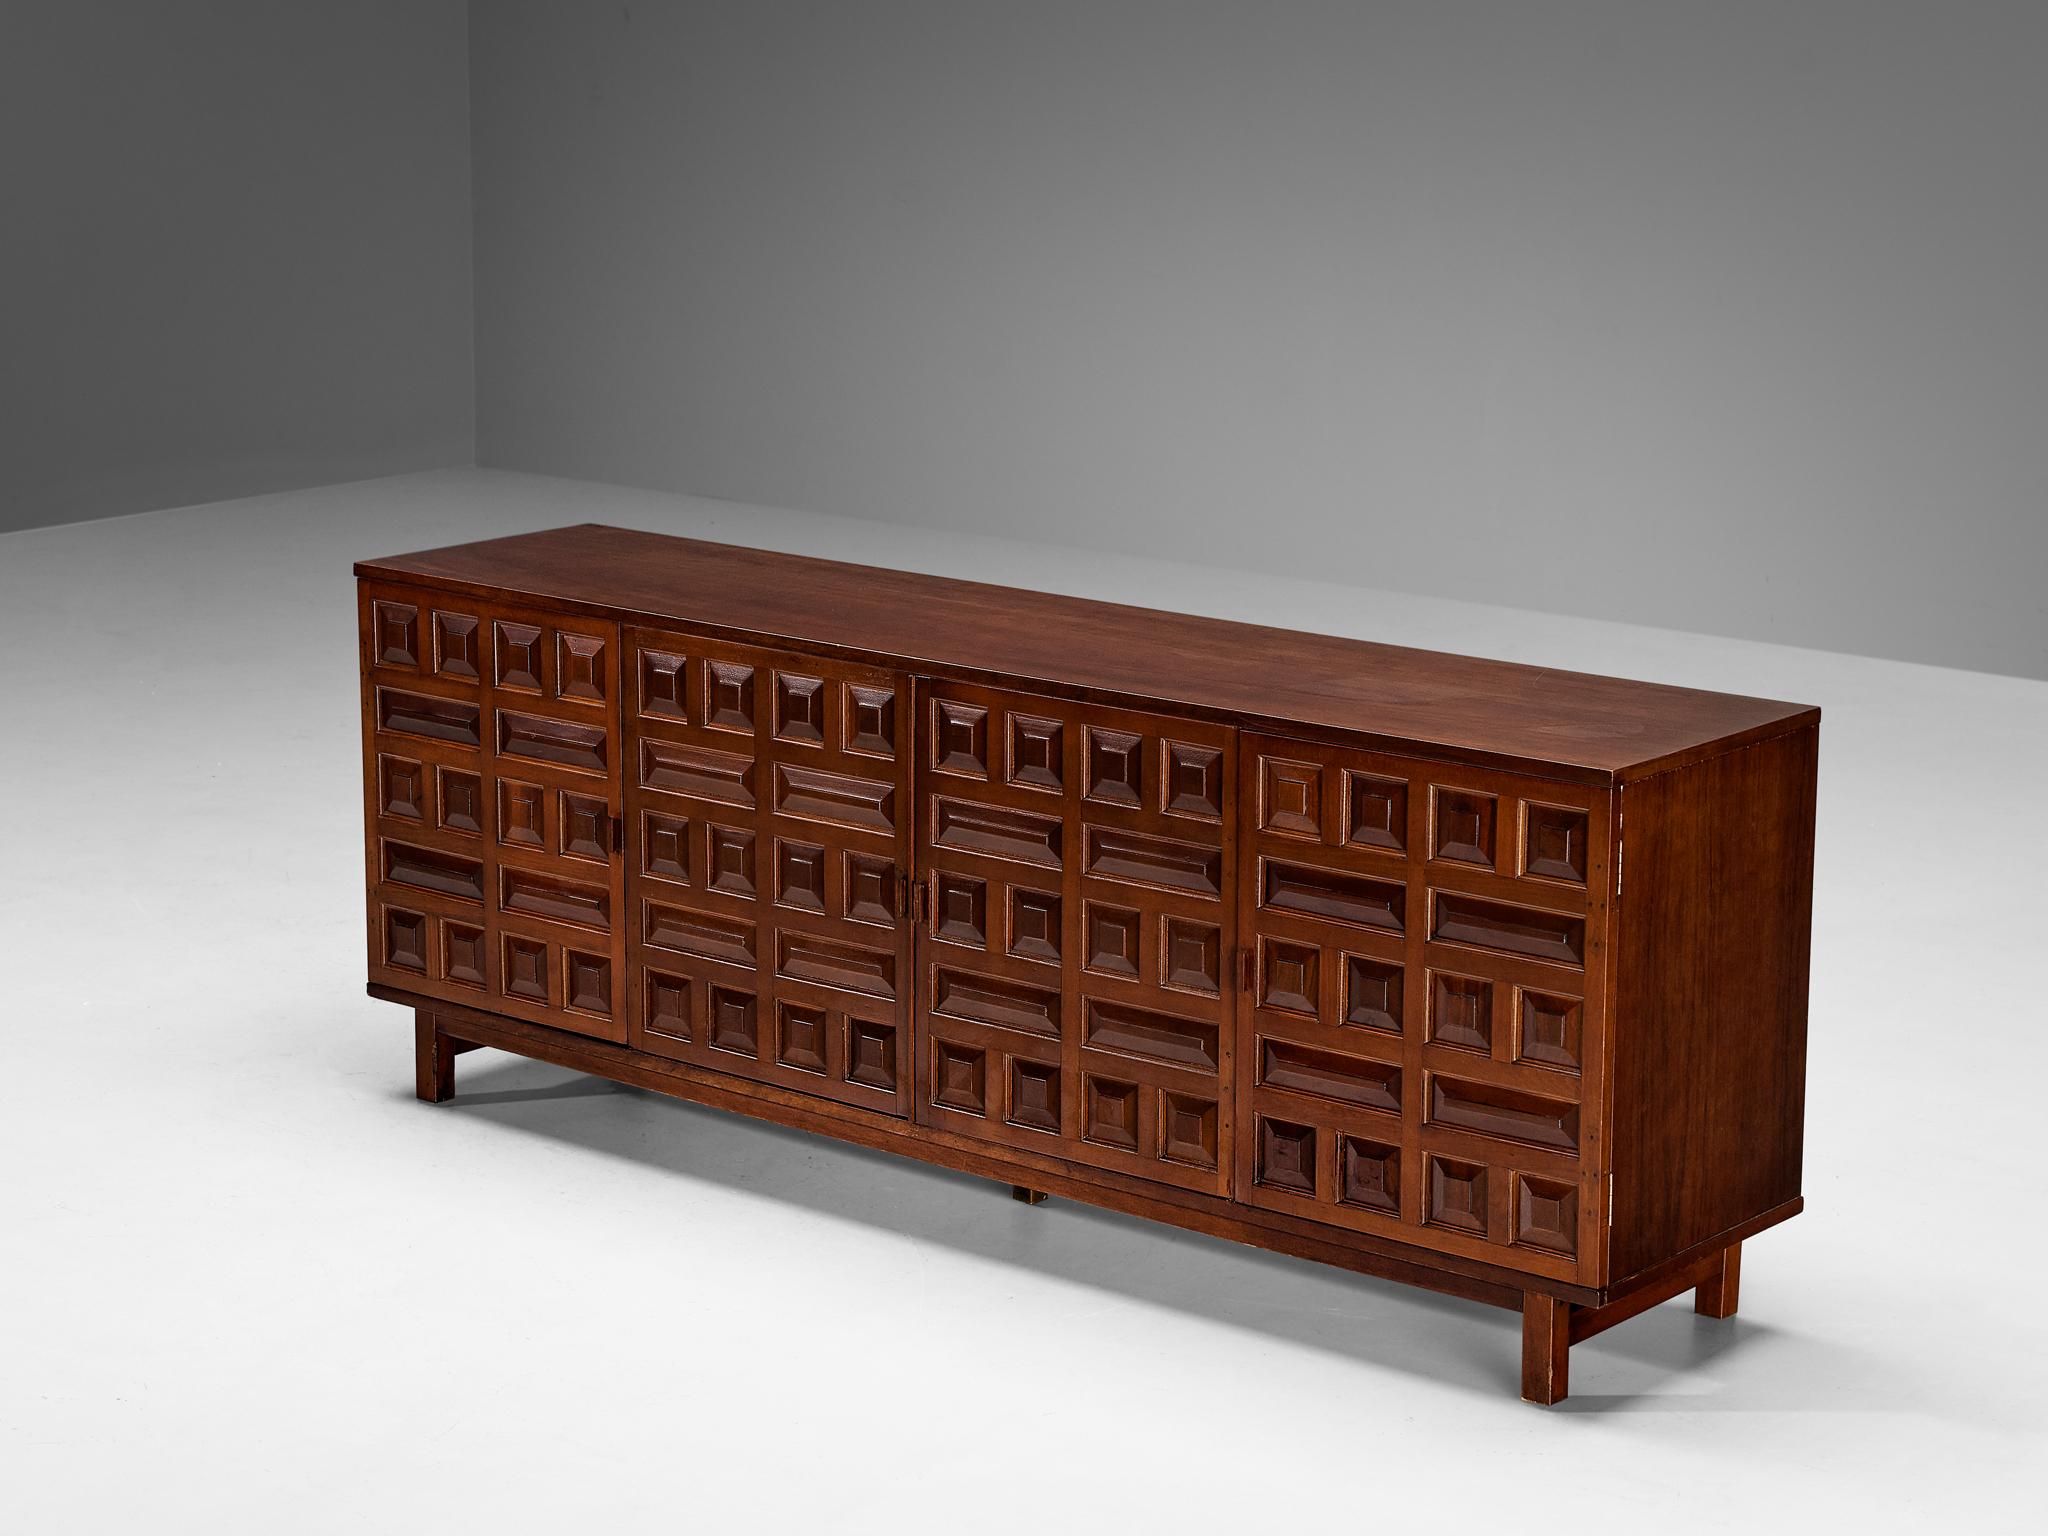 Sideboard, stained mahogany, Spain, 1970s.

This cabinet originates from Spain and shows the decorative characteristics of the 16th century Castilian furniture design. The carved geometric shapes on the door panels immediately catch the eye and